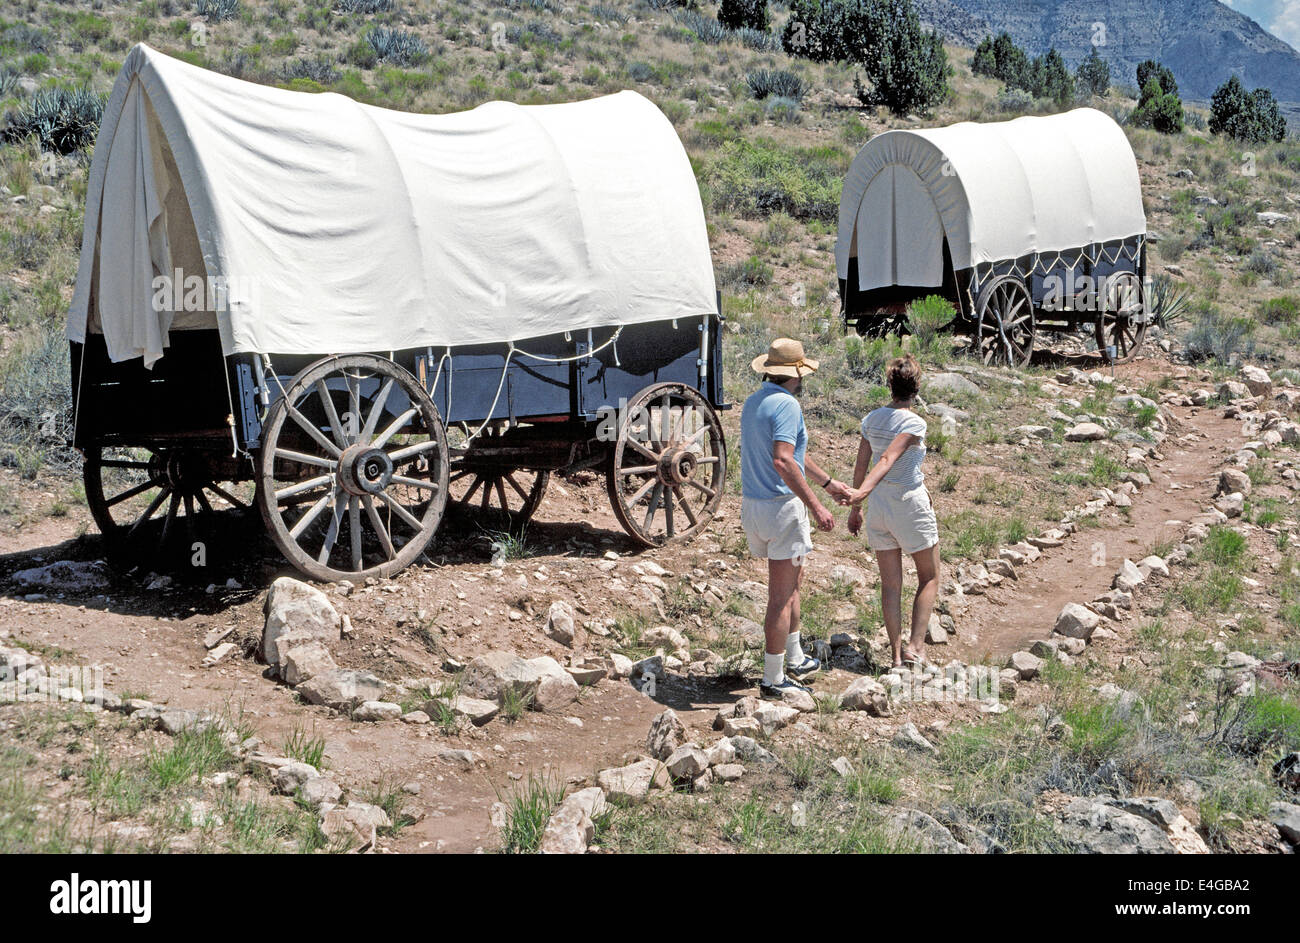 An adventurous couple heads for the covered wagon that is their unusual bedroom lodging at Bar 10 Ranch high above the Grand Canyon in Arizona, USA. Stock Photo